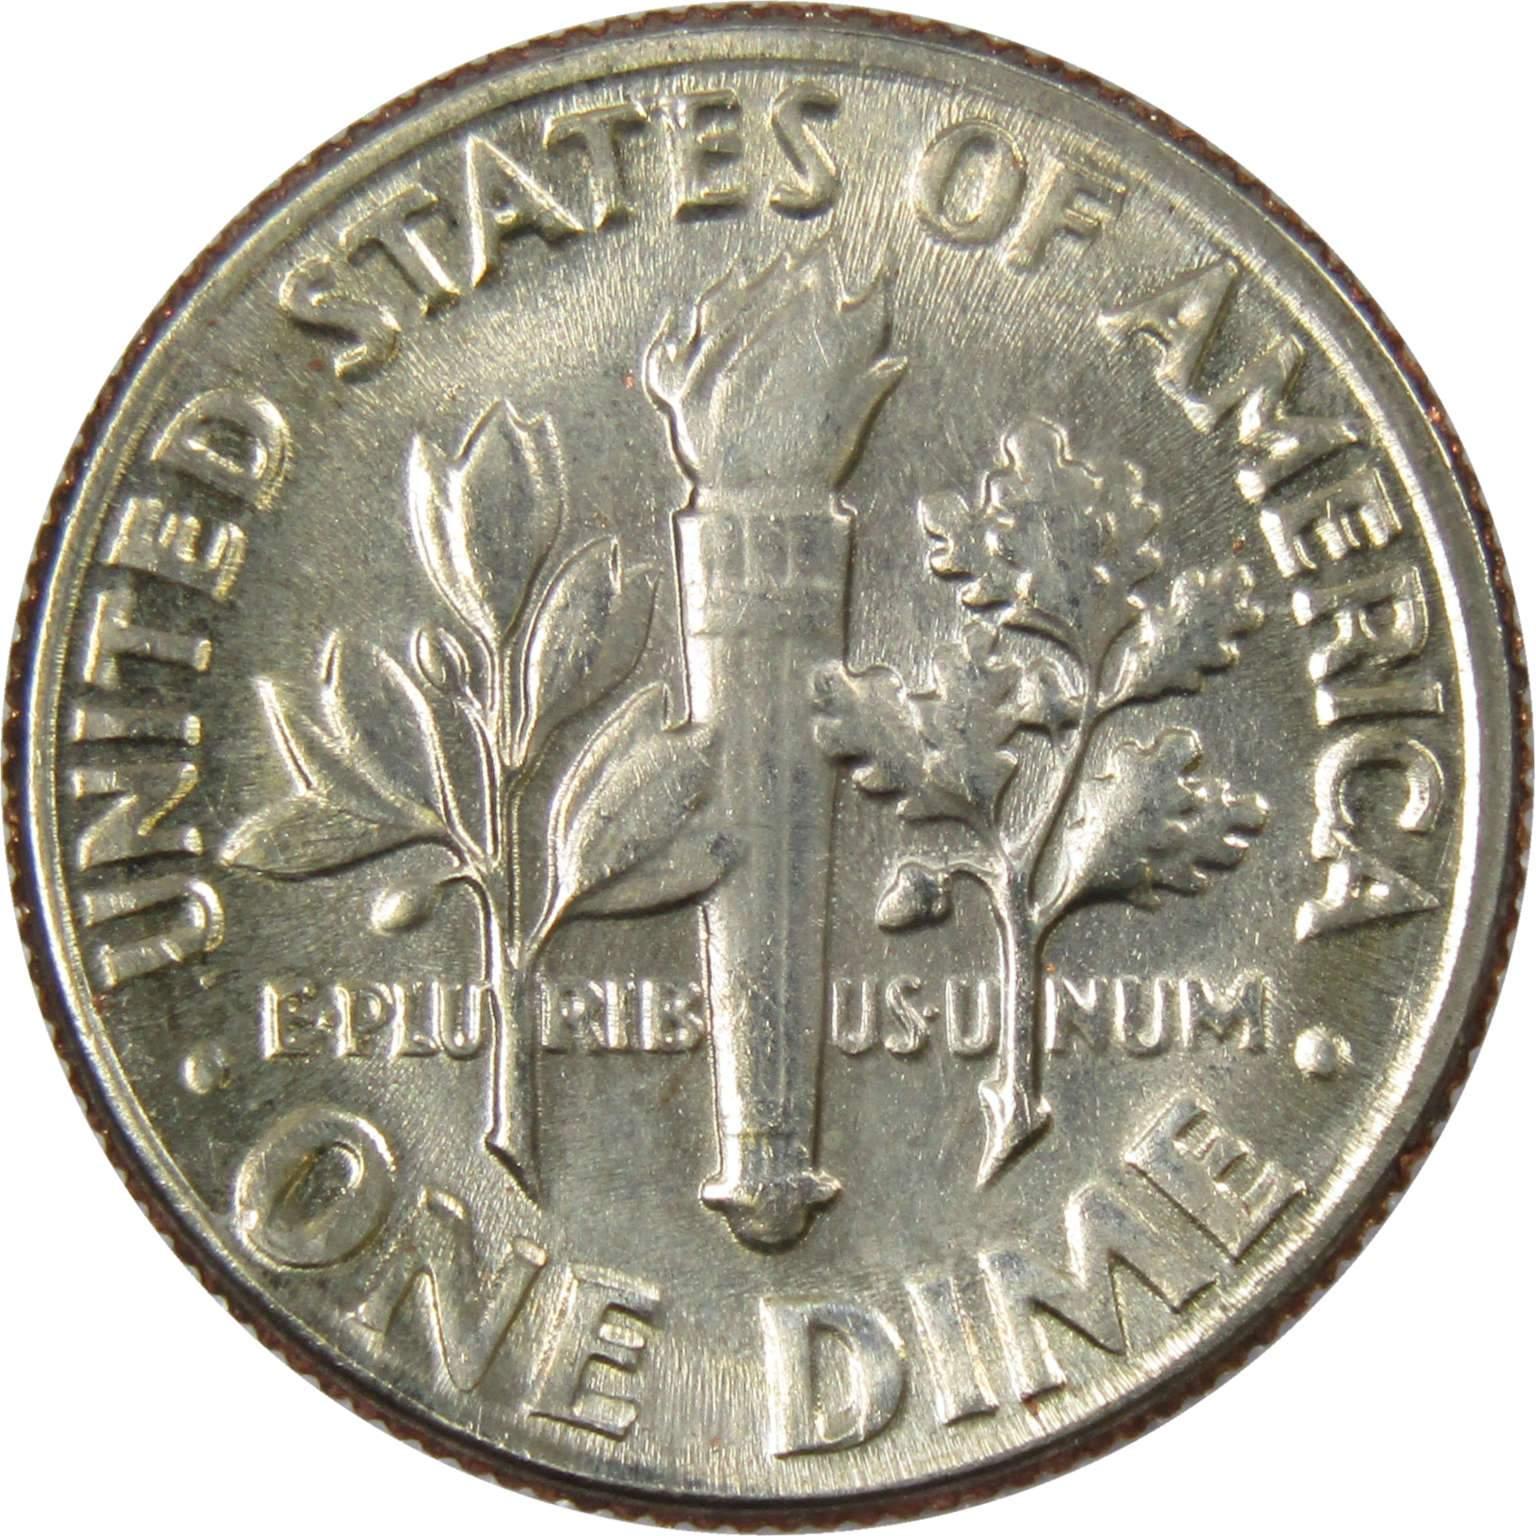 1975 D Roosevelt Dime BU Uncirculated Mint State 10c US Coin Collectible